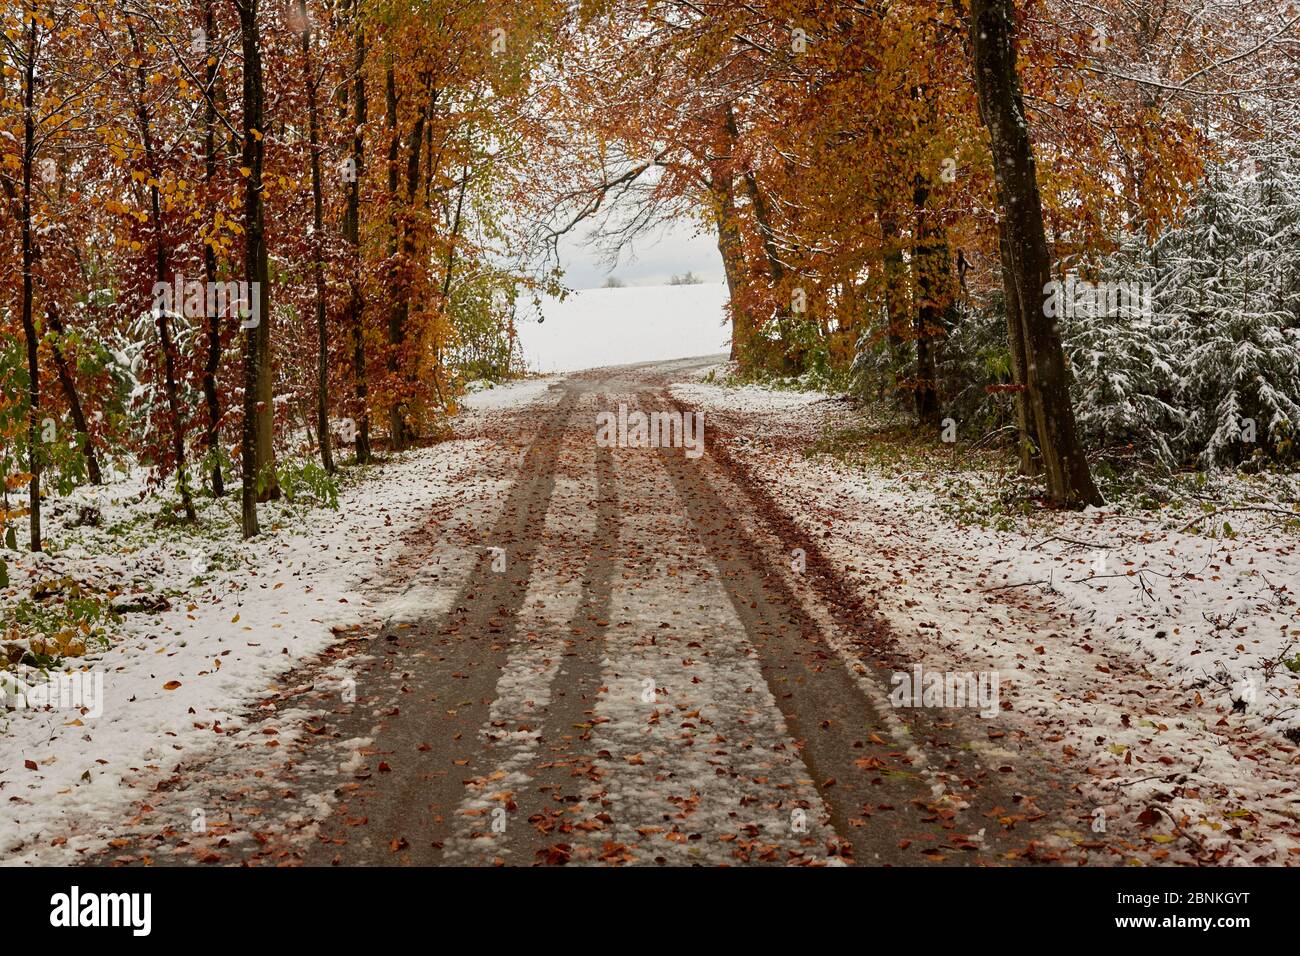 Country road, leaves, ice, snow, wetness, forest, tire tracks in the snow Stock Photo